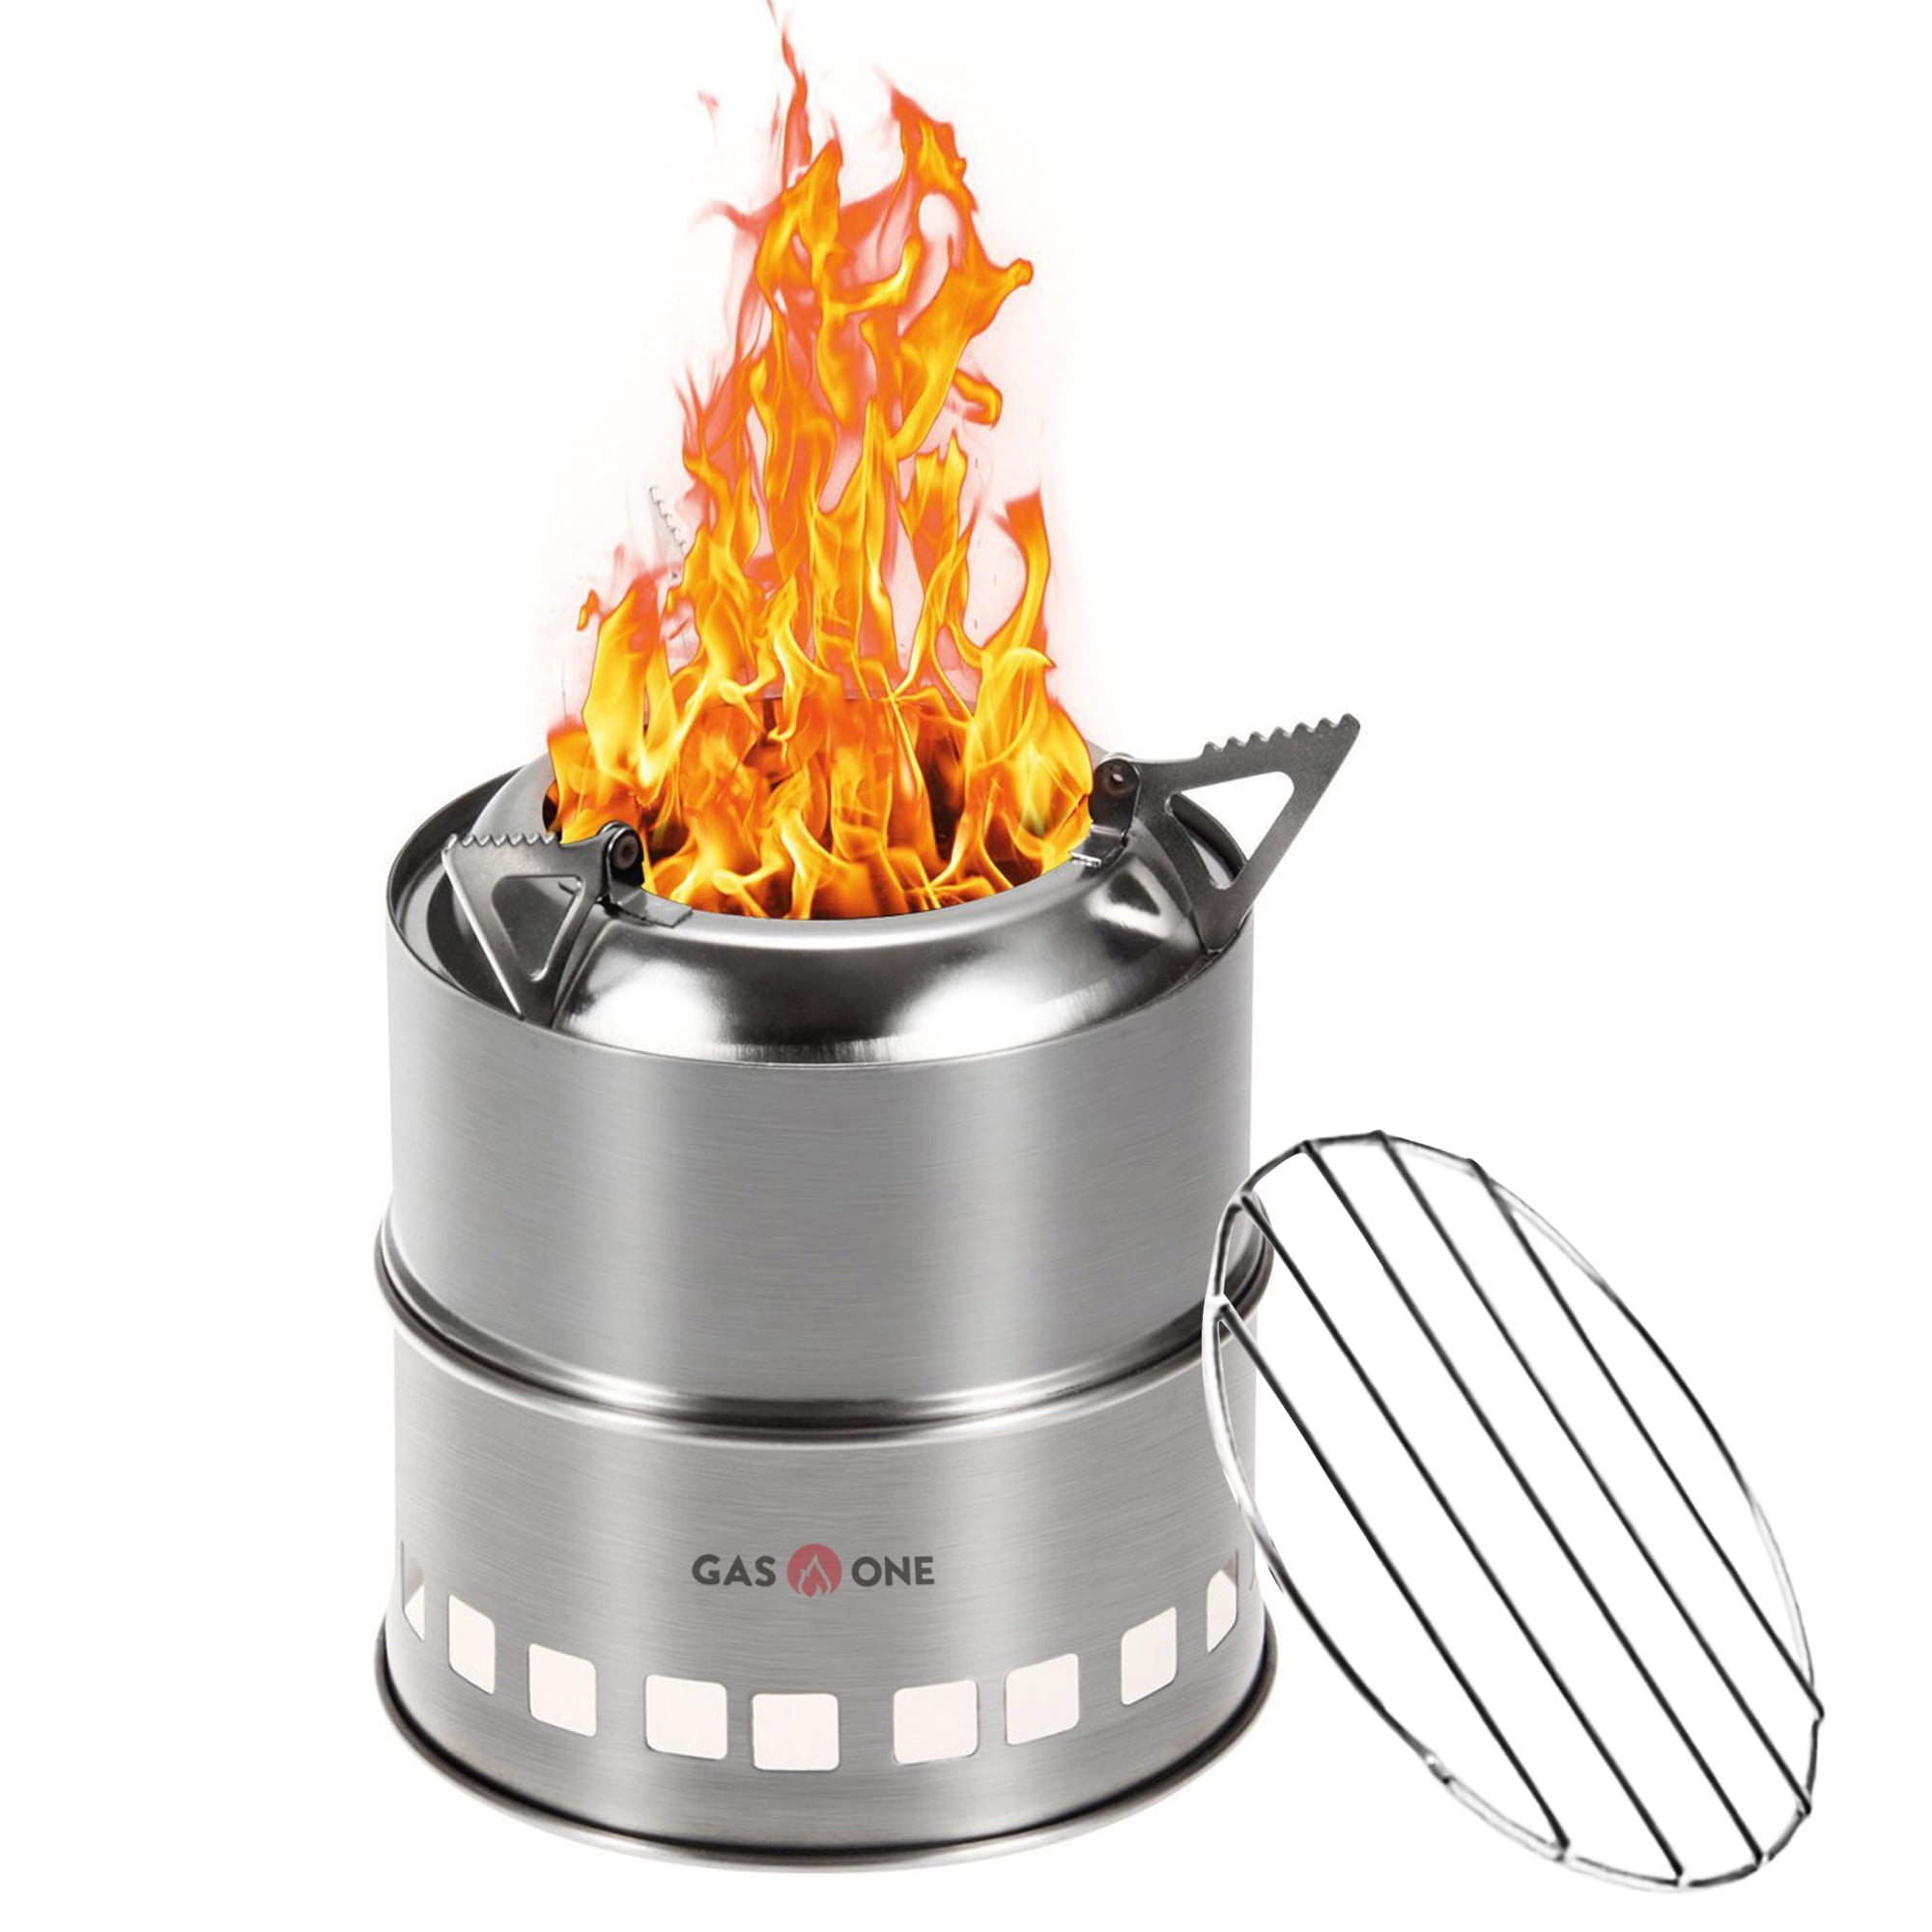 Camping Stove Cooking Camp Wood Heater Portable Stainless Steel For Picnic 